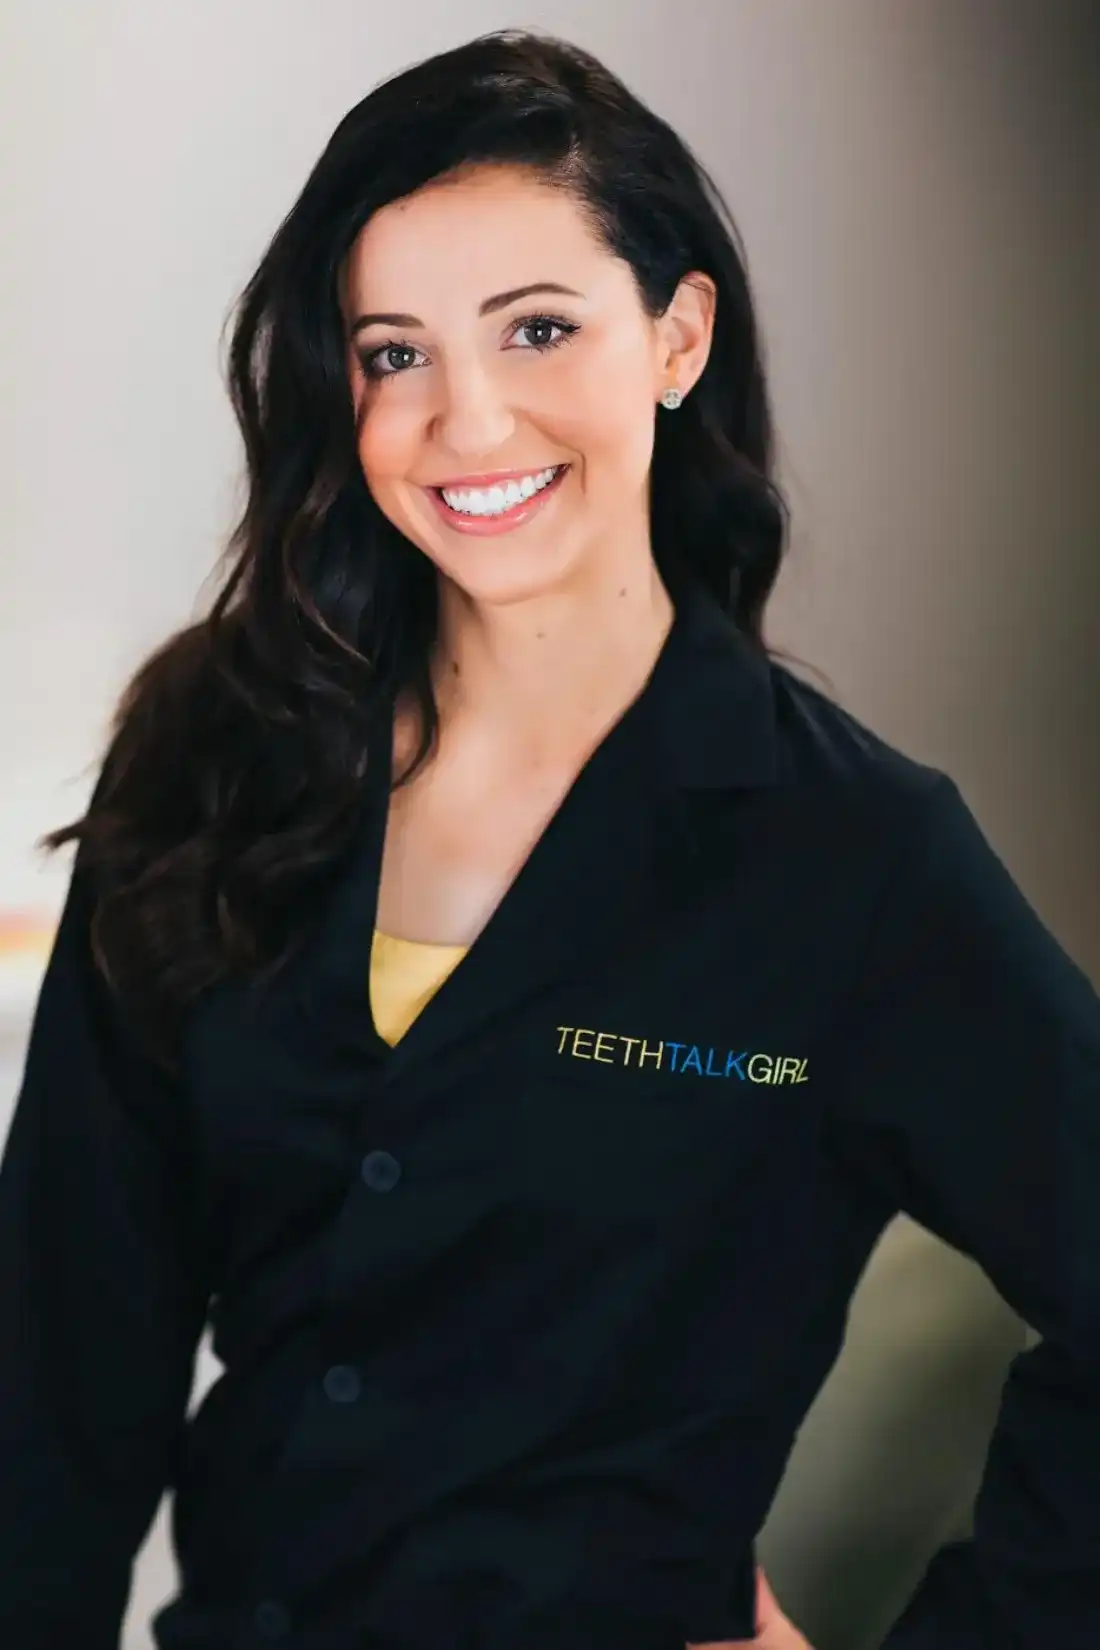 Stars Making a Social Impact: How Youtuber and Dental Hygienist, Whitney Rose DiFoggio, Helps To Inspire the Masses About Oral Health in an Entertaining Way